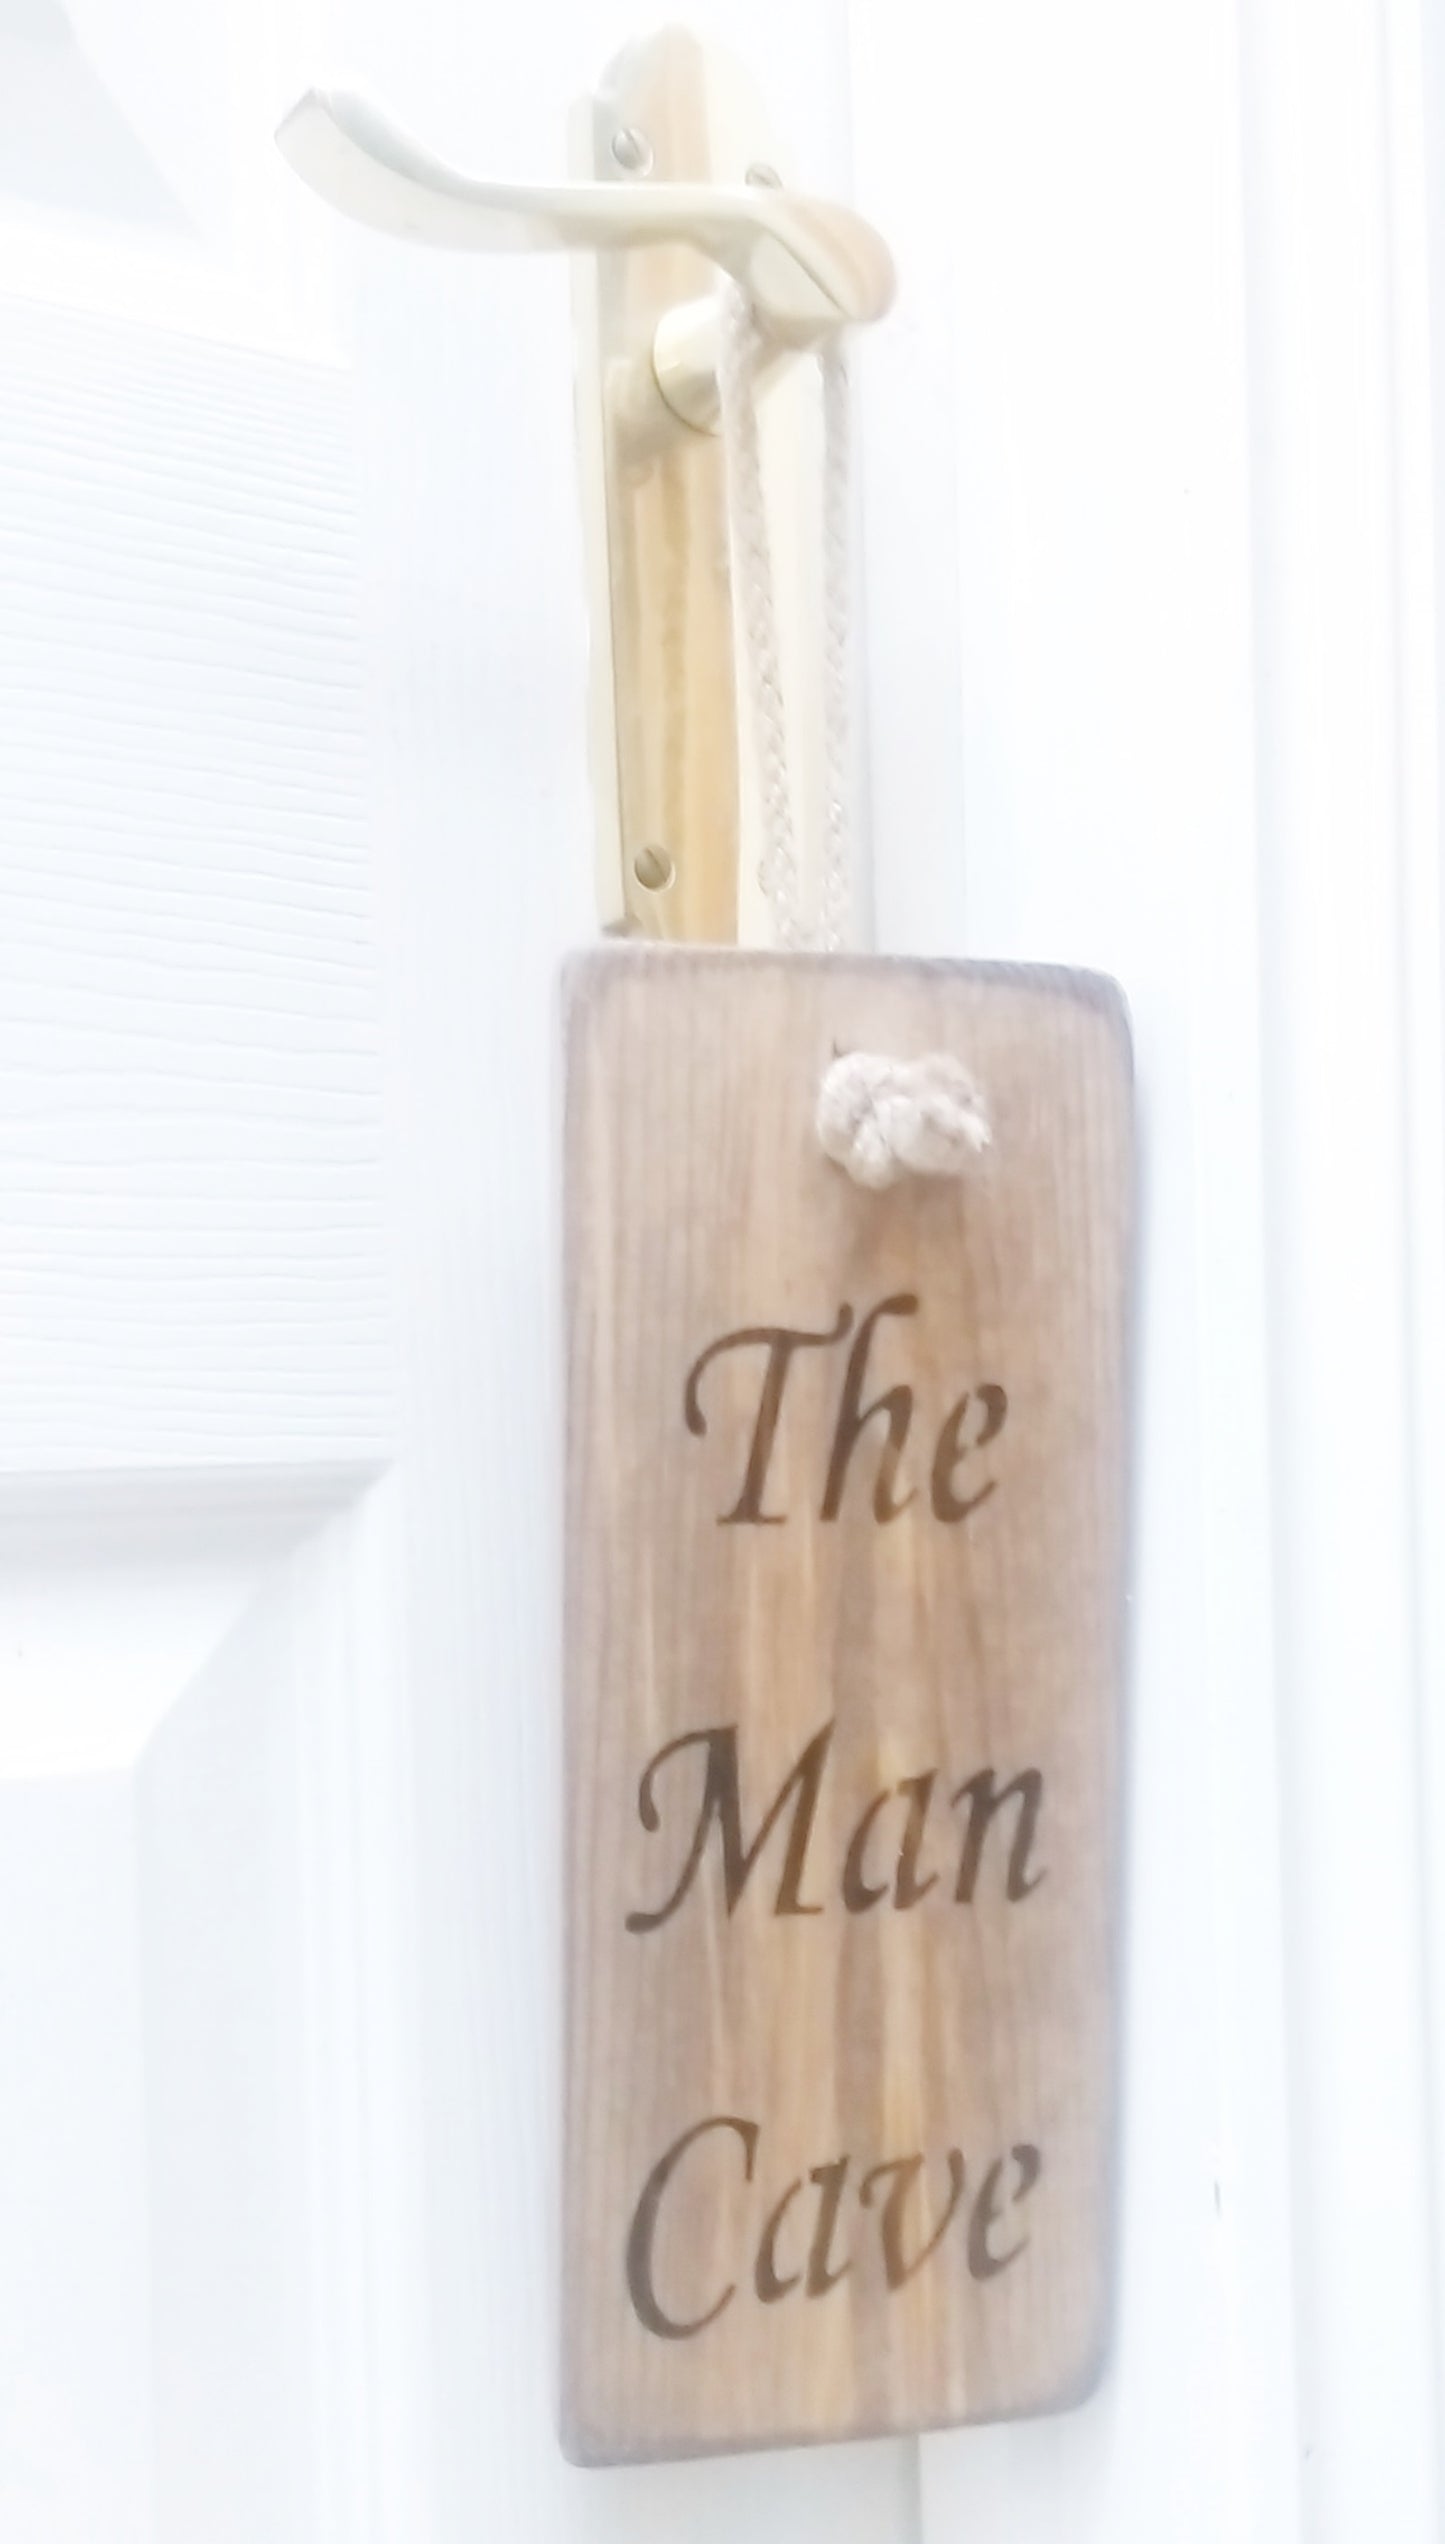 The Man Cave - Vintage shabby chic Wooden Door Hanger Sign By Austin Sloan